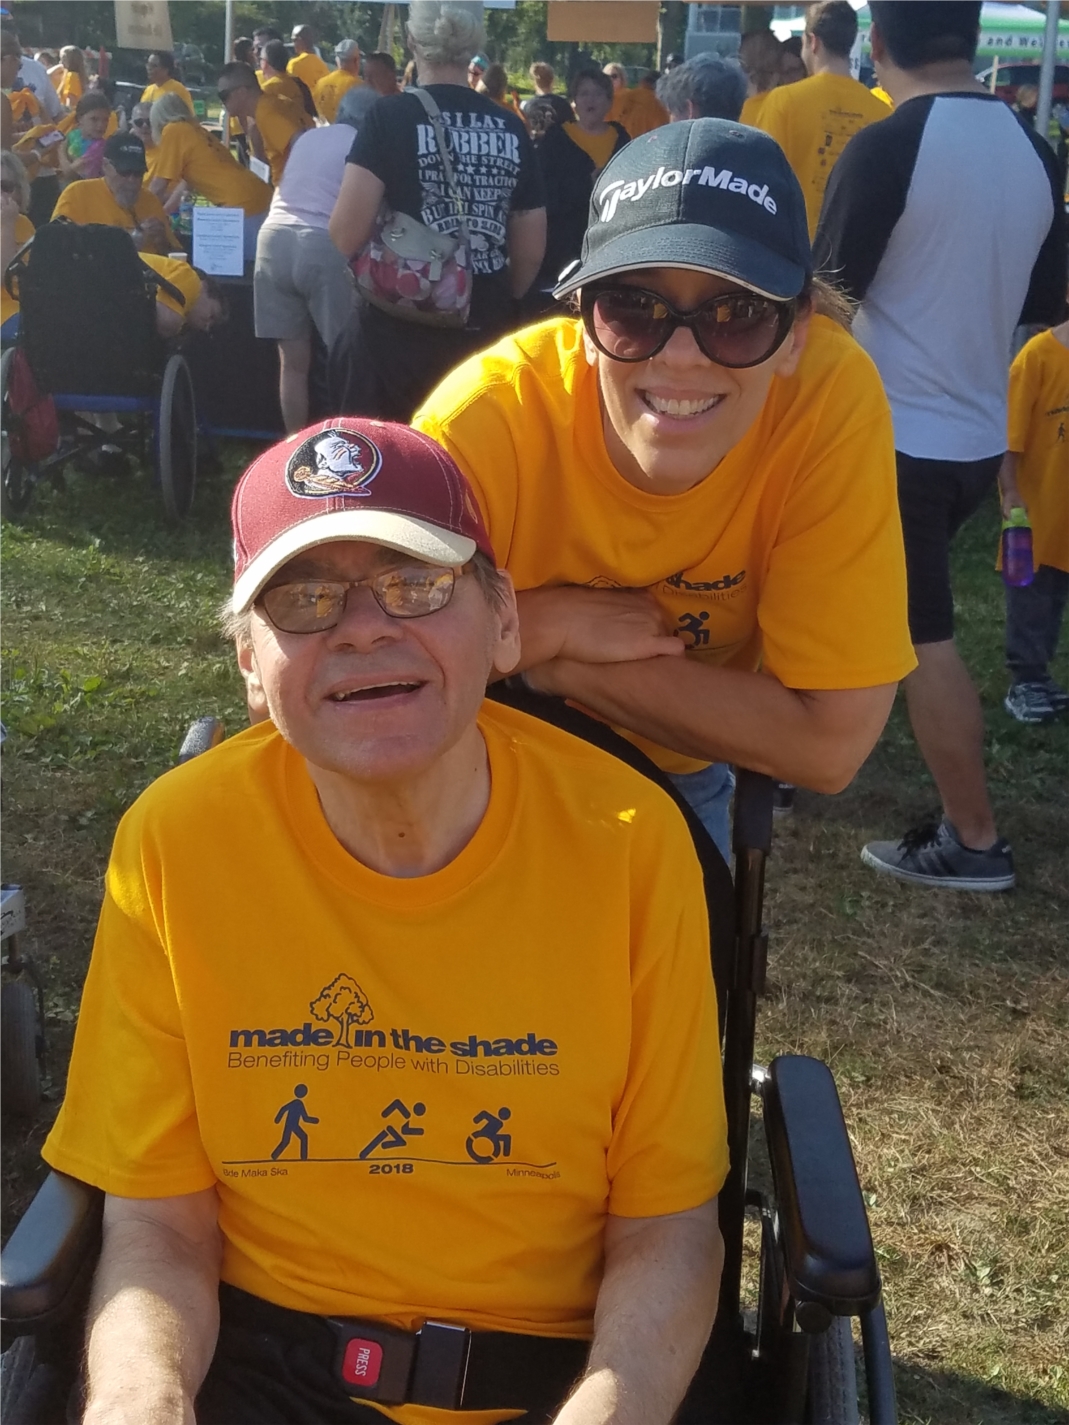 Every fall we gather with other disability providers to hold a 5K walk, run and roll called Made in the Shade to gain support and awareness of people with disabilities